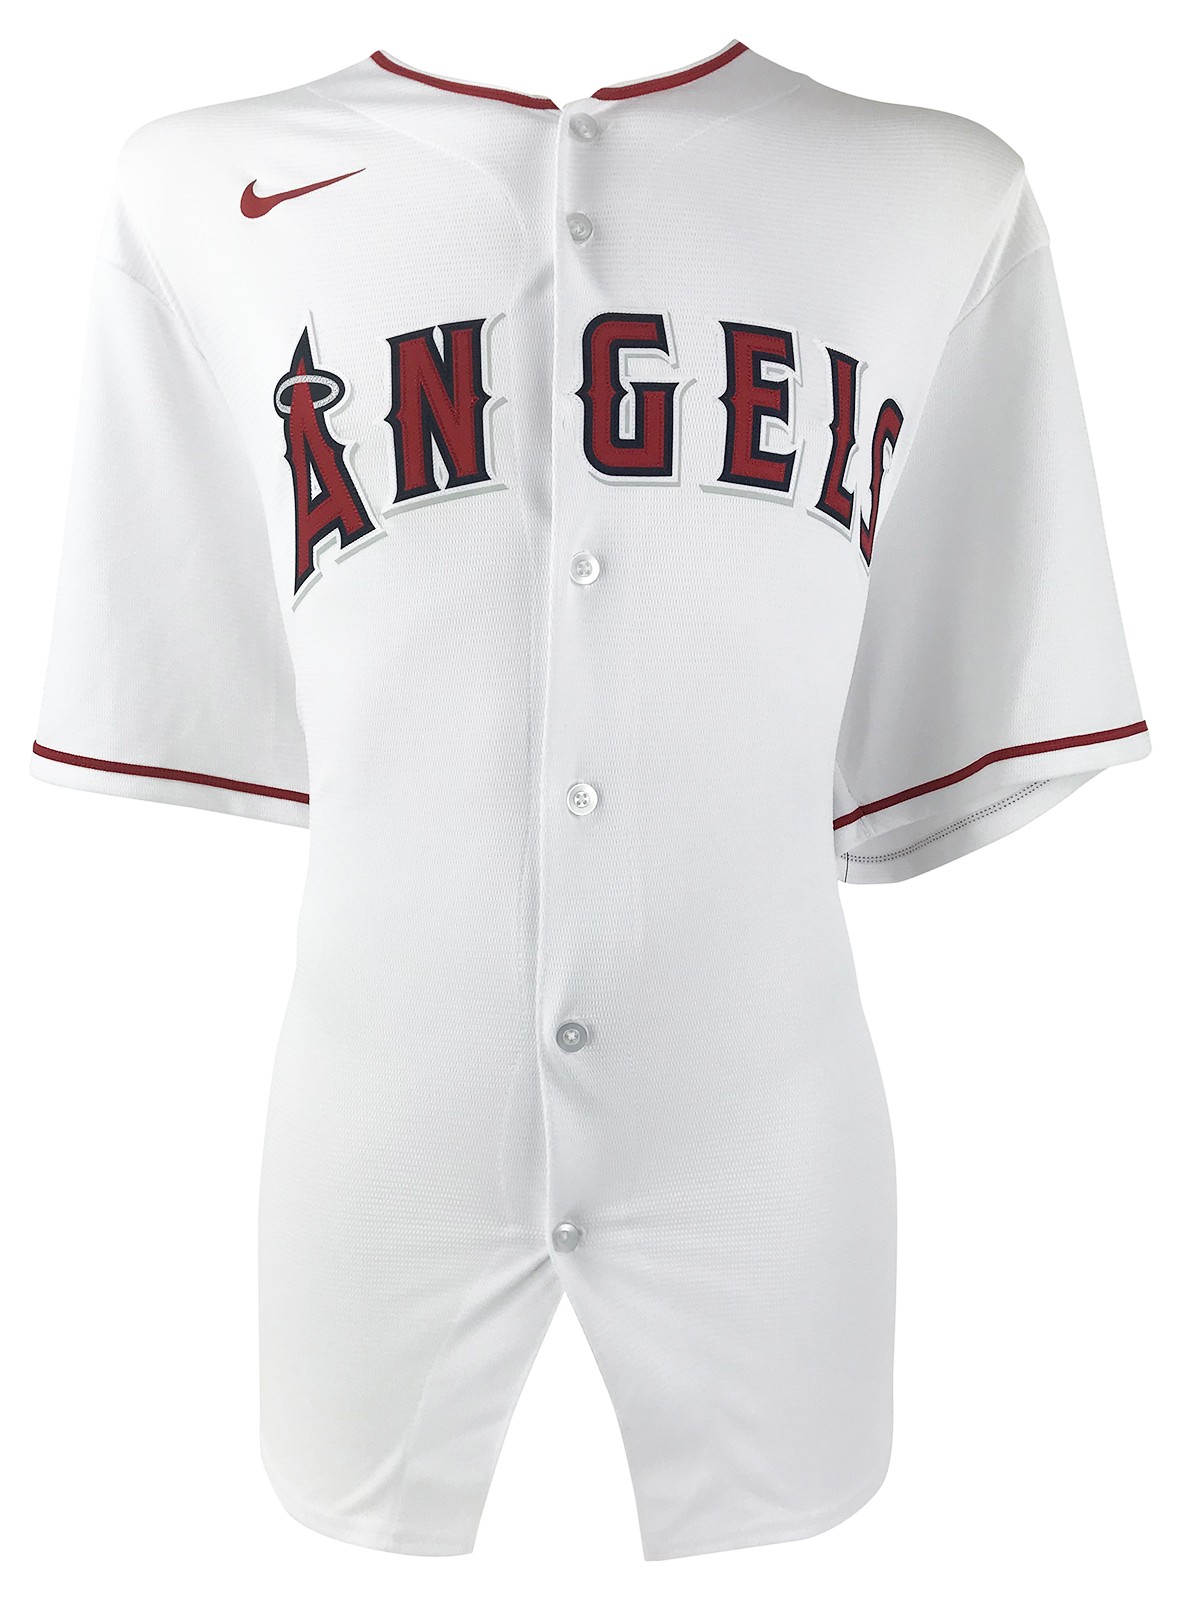 mike trout jersey cheap